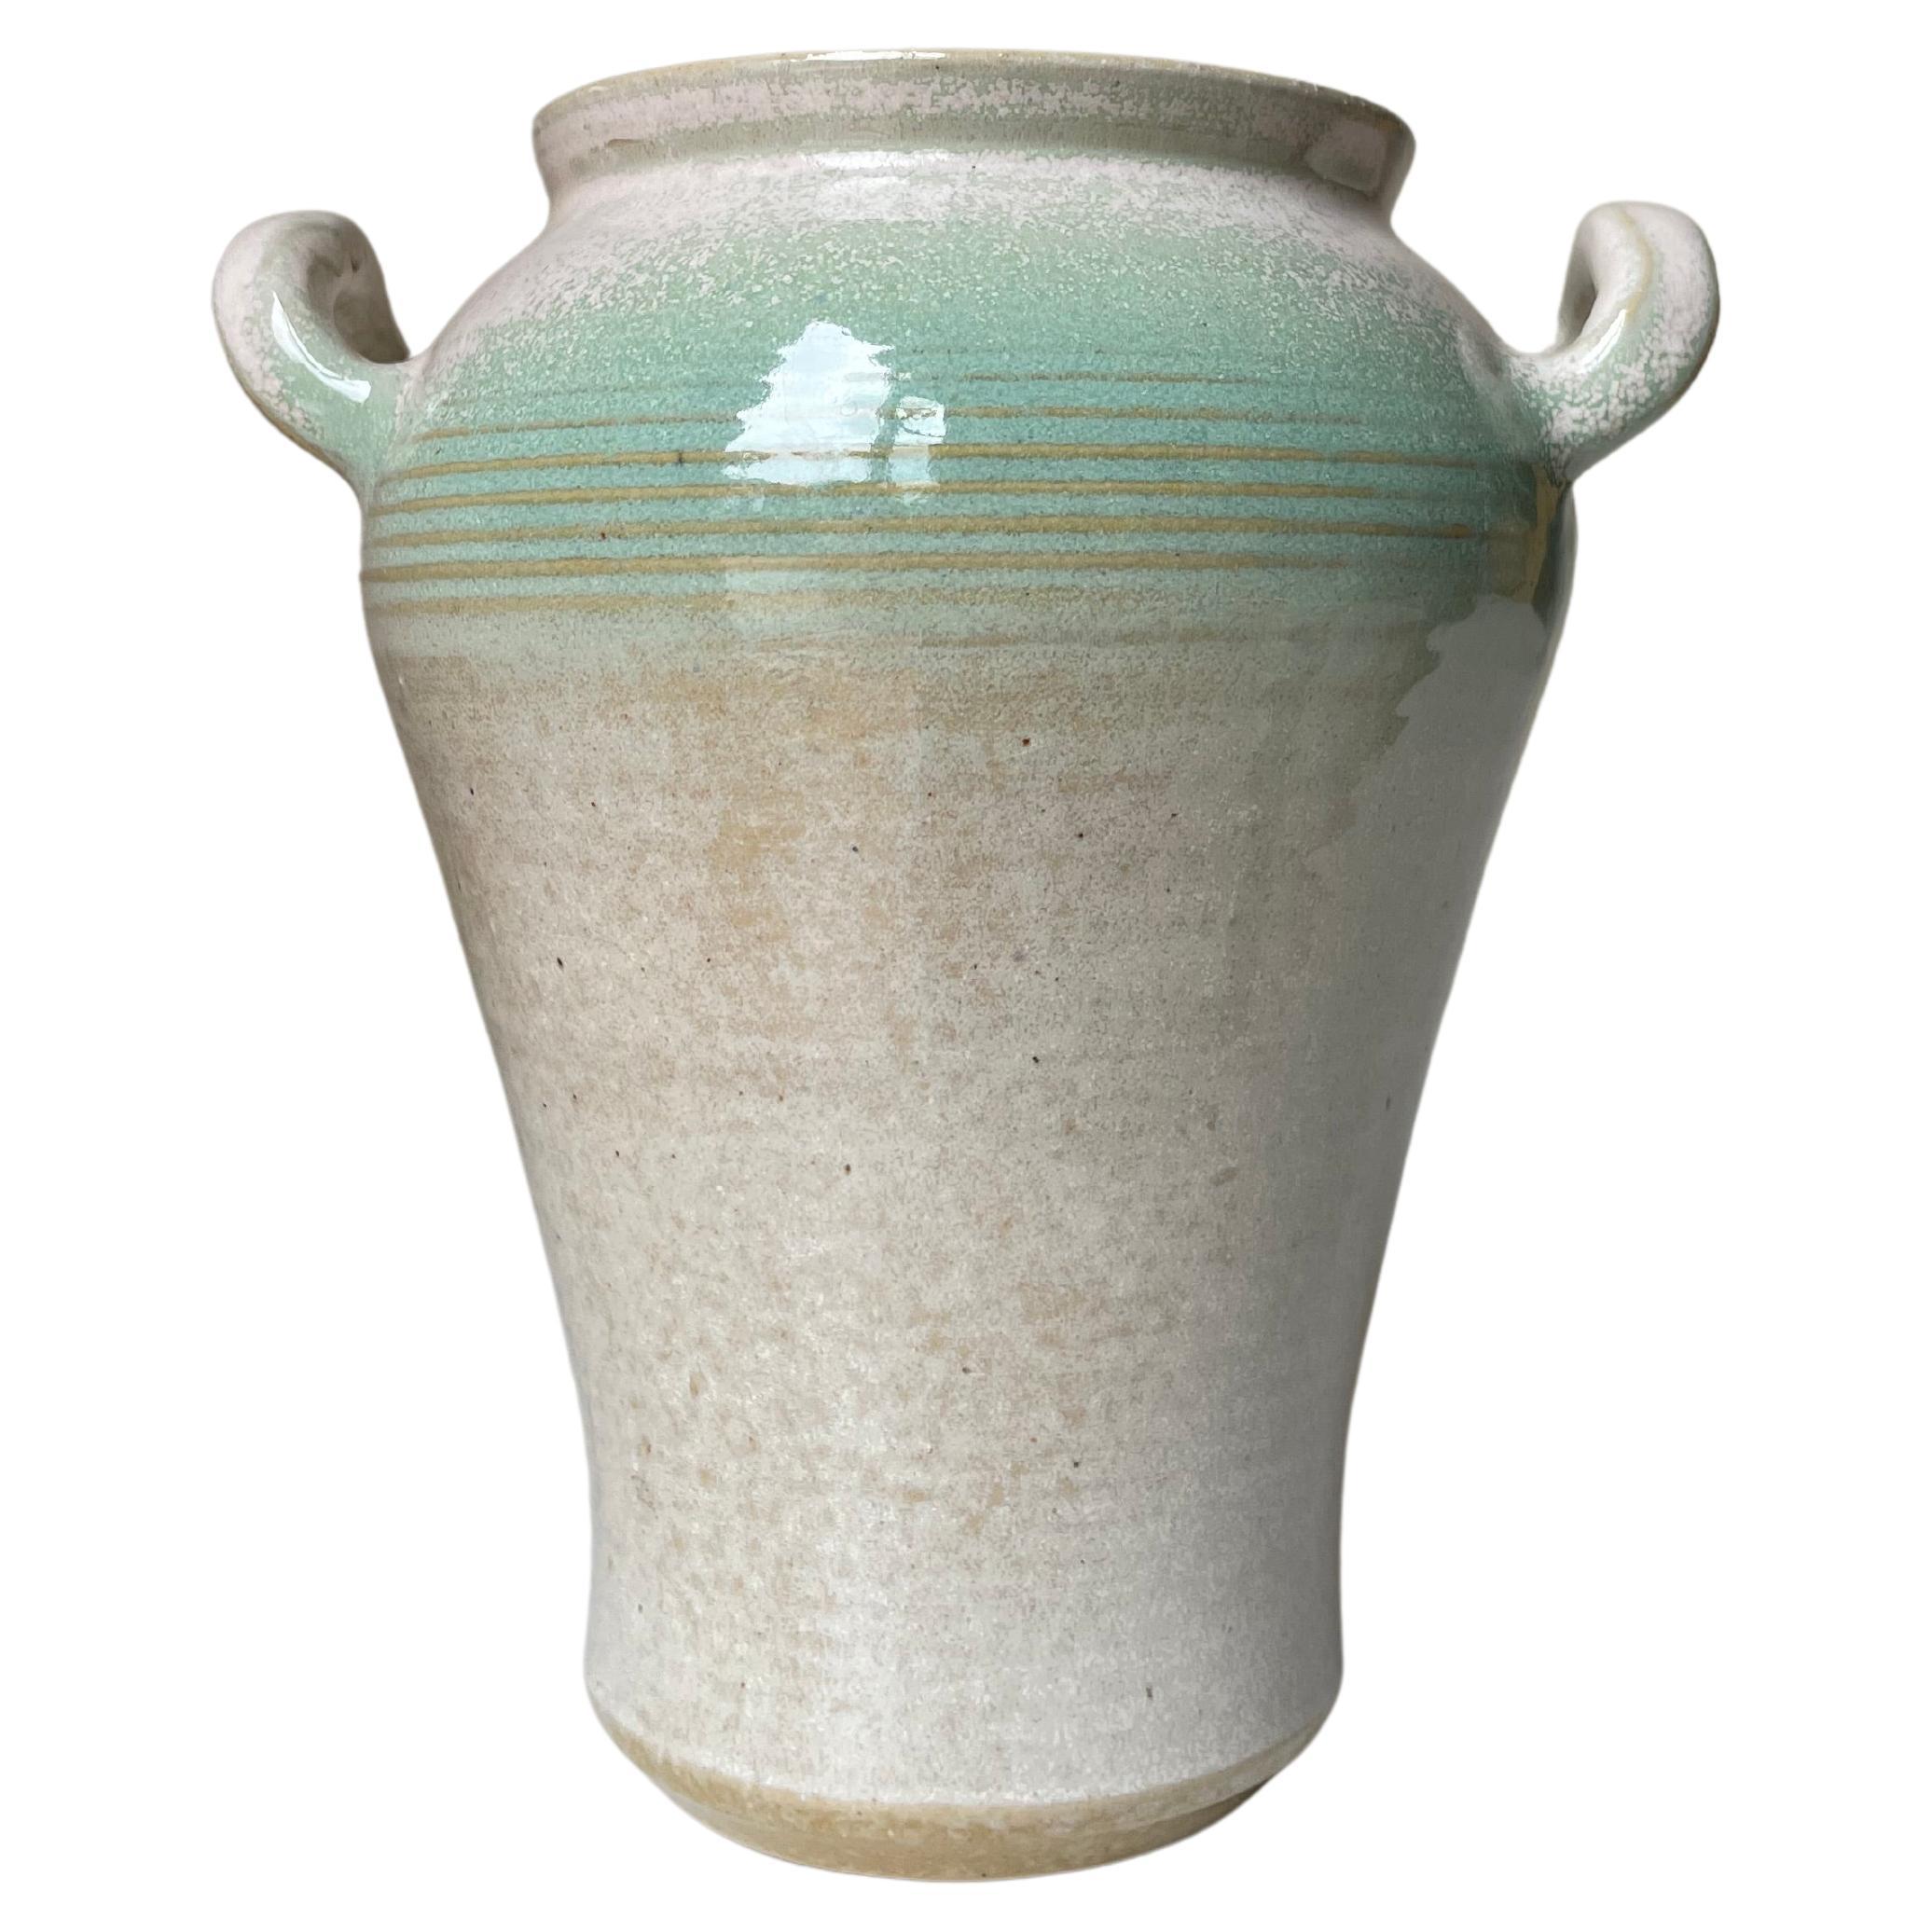 Skottorp White and Pastel Green Glazed Stoneware Handle Vase, 1970s For Sale